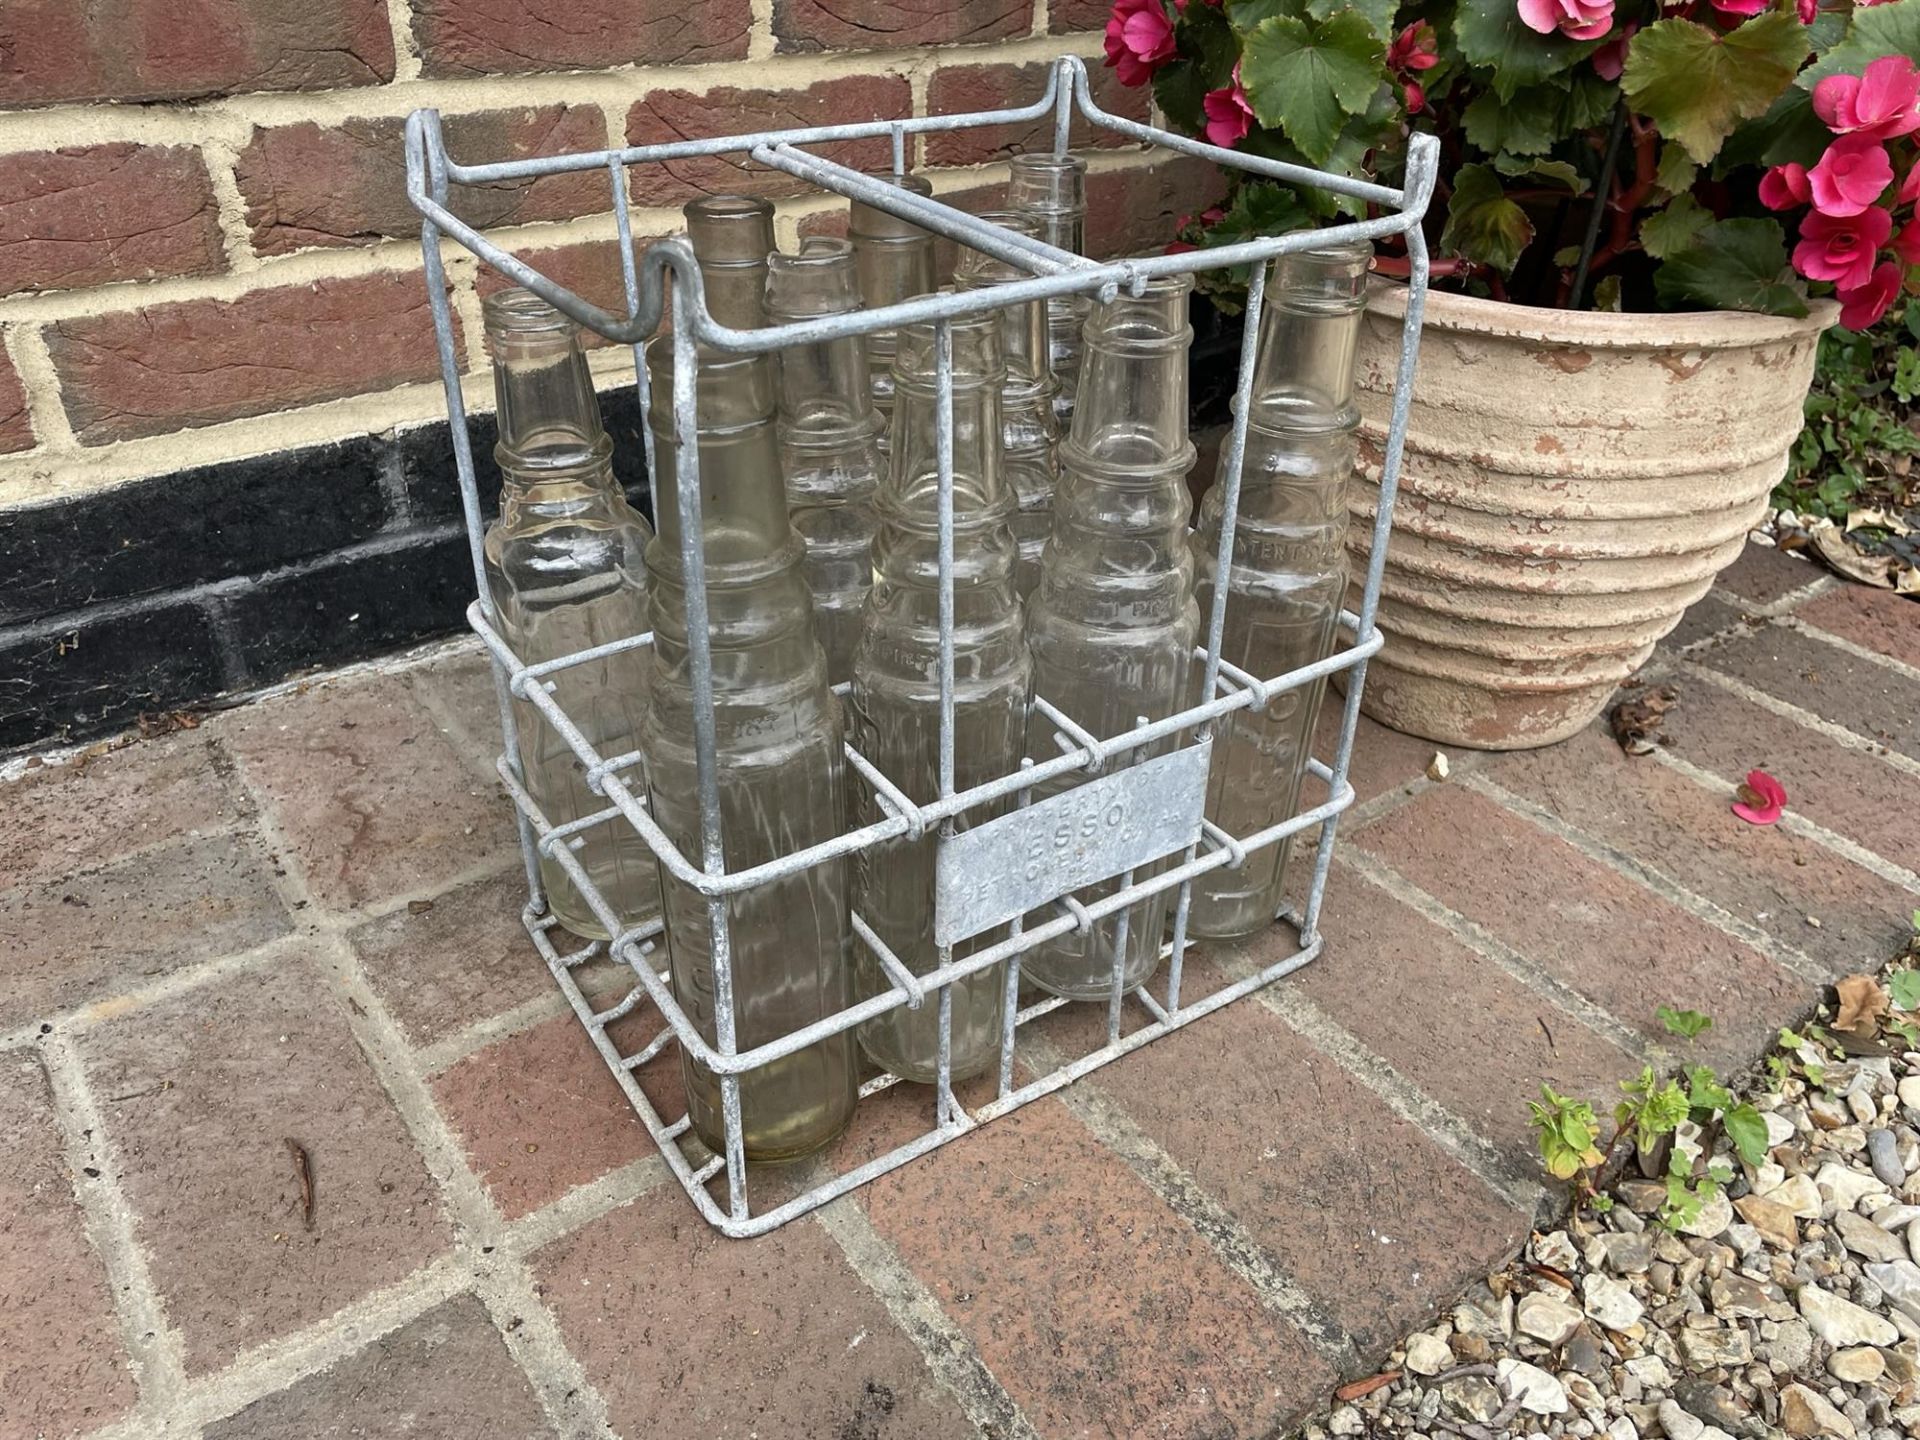 Selection of Esso Oil Bottles and Period Correct Crate